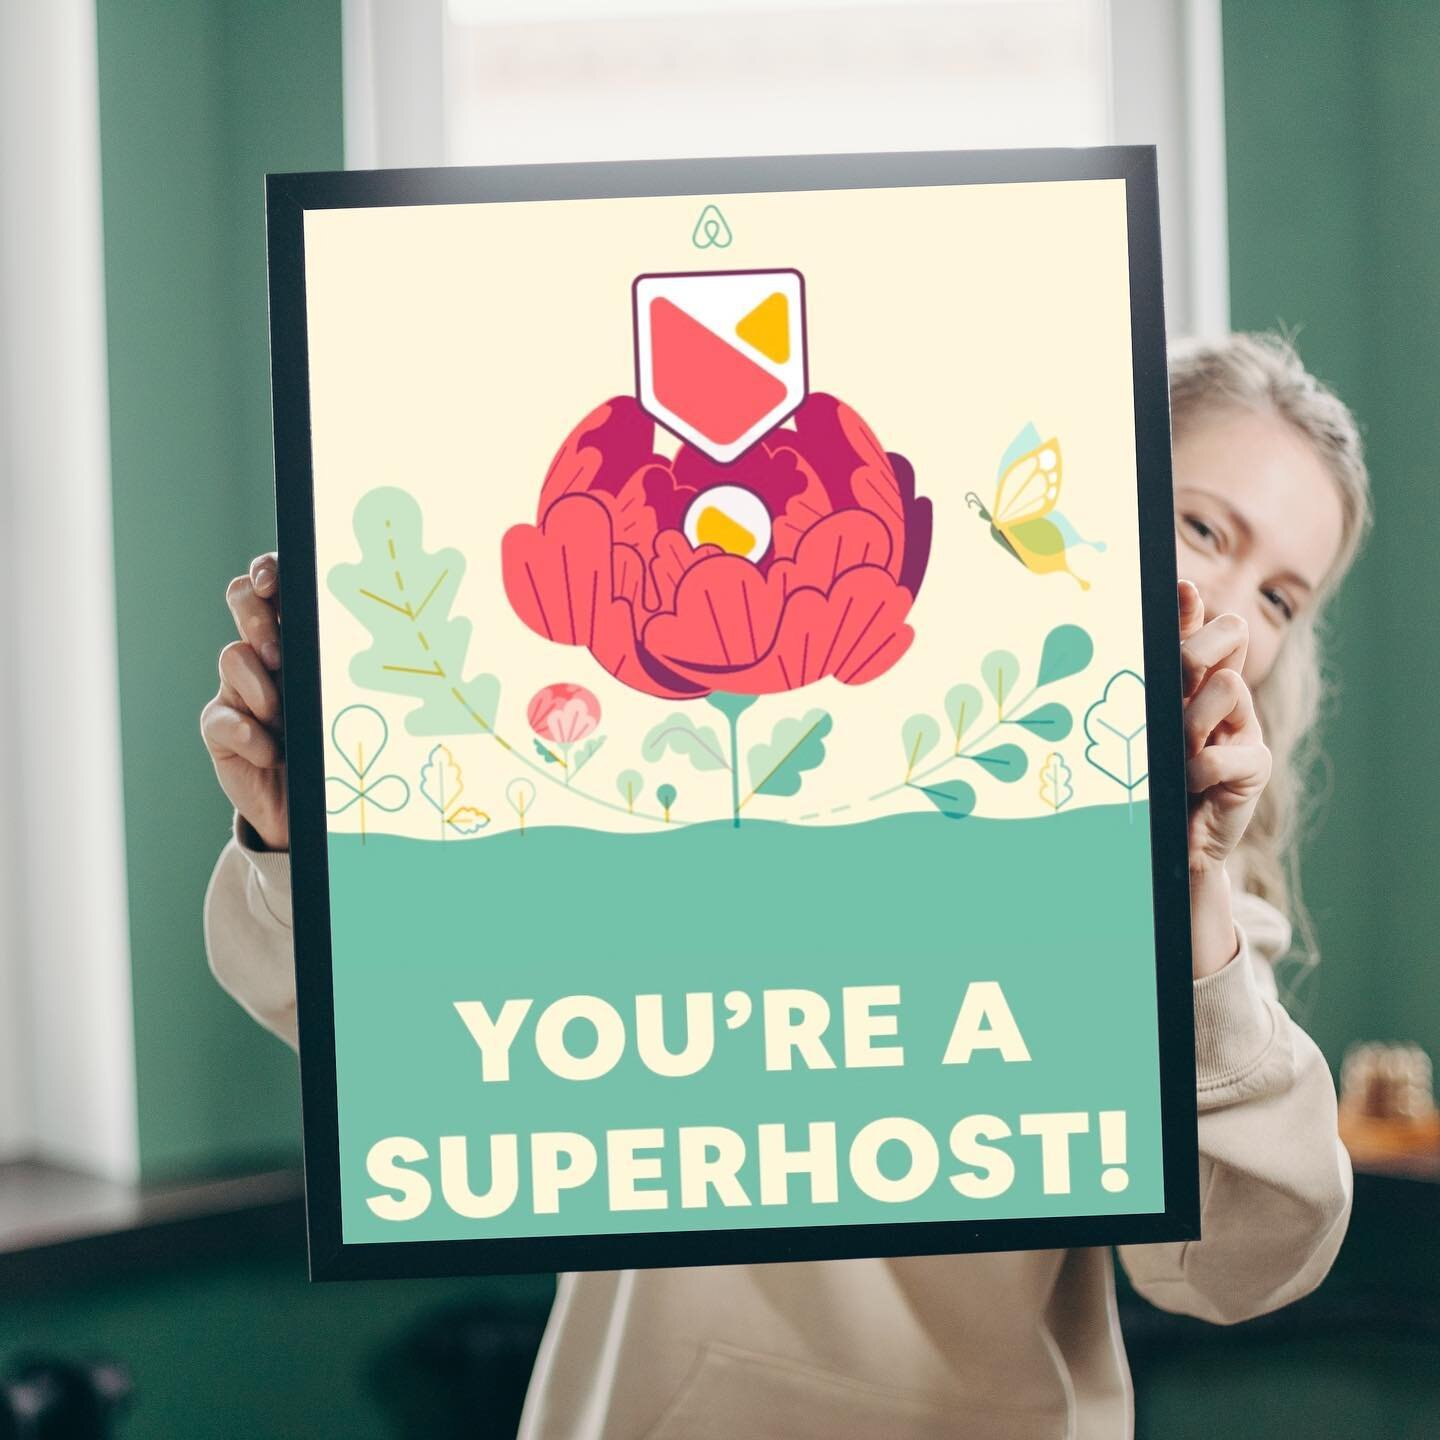 So thankful to have reached our 40th stay milestone! To top it off we&rsquo;ve managed to maintain our @airbnb #Superhost status, all thanks to YOU, our amazing Guests. 🥂

Stays: 40
Cancellation Rate: 0.0%
Response Rate: 100%
Overall Rating: ★ ★ ★ ★